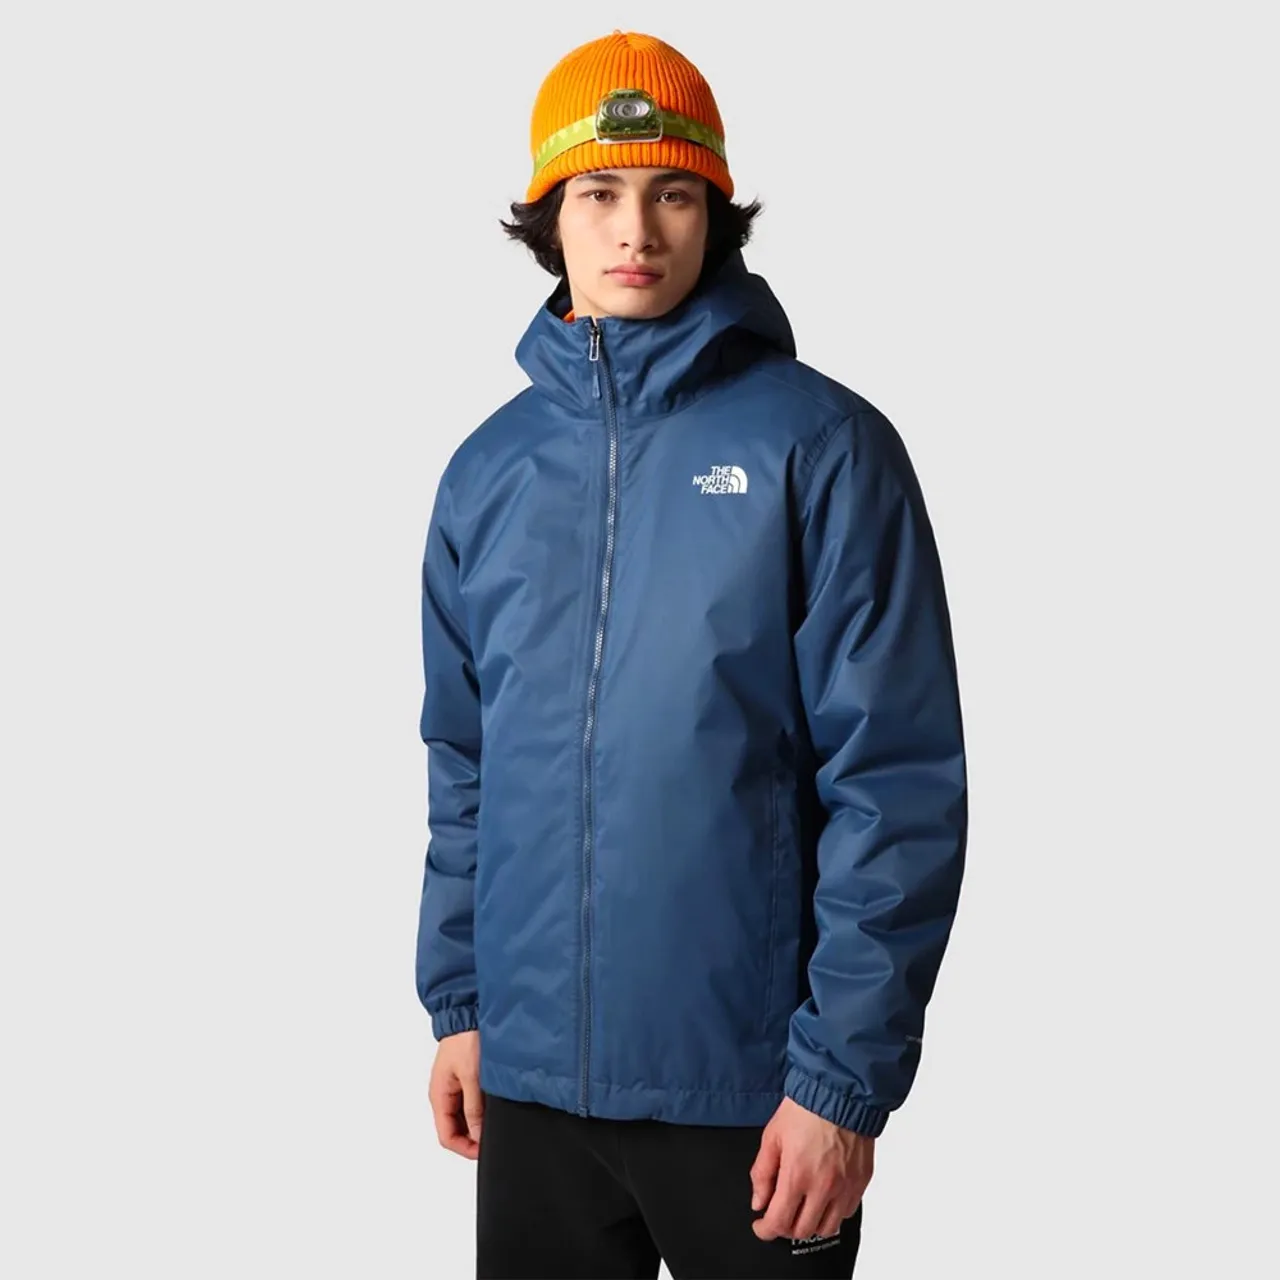 The North Face Quest insulated